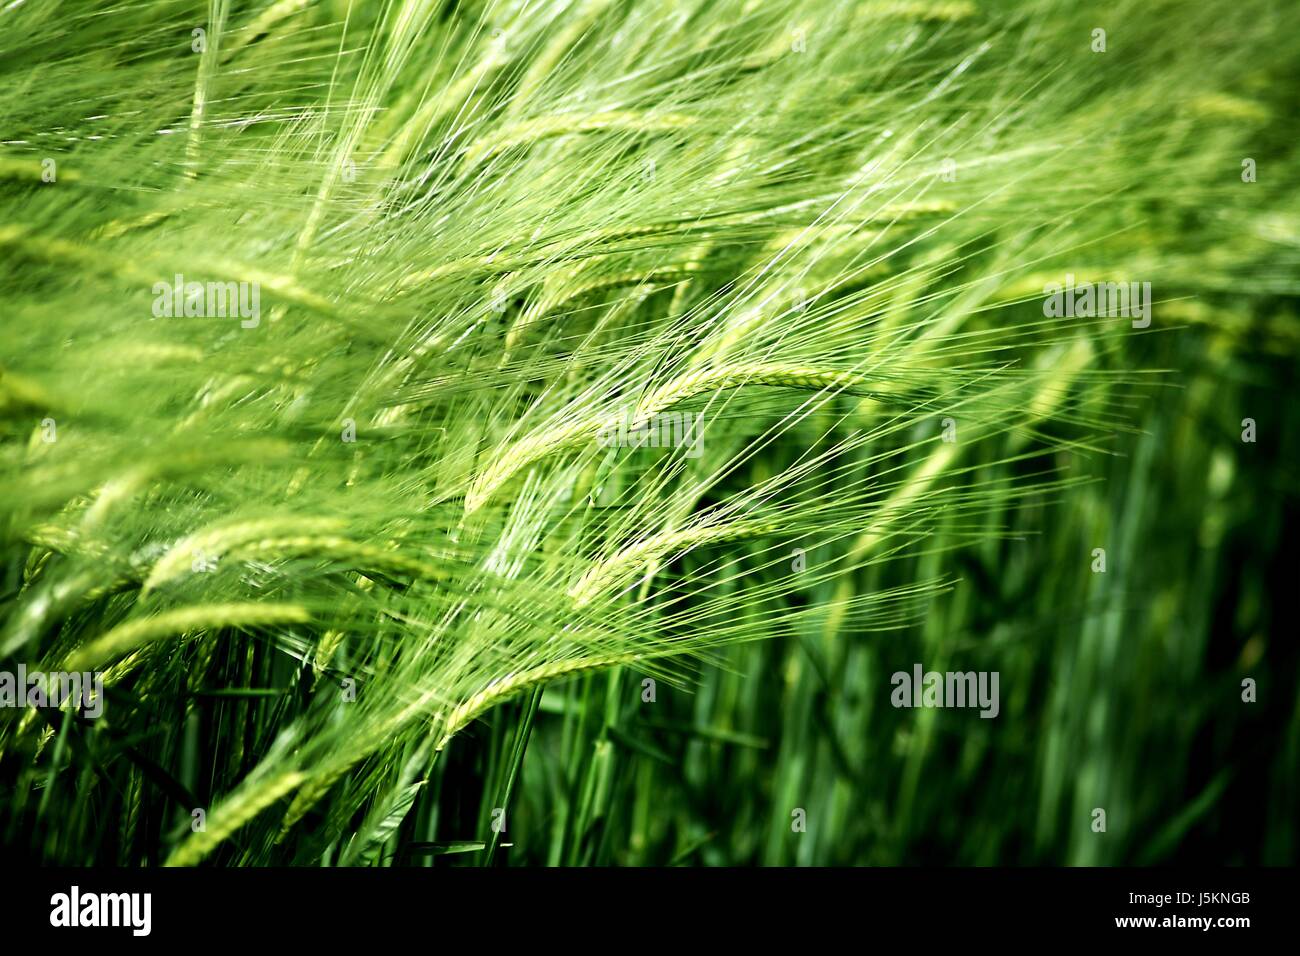 motion postponement moving movement green agriculture farming useful plant Stock Photo